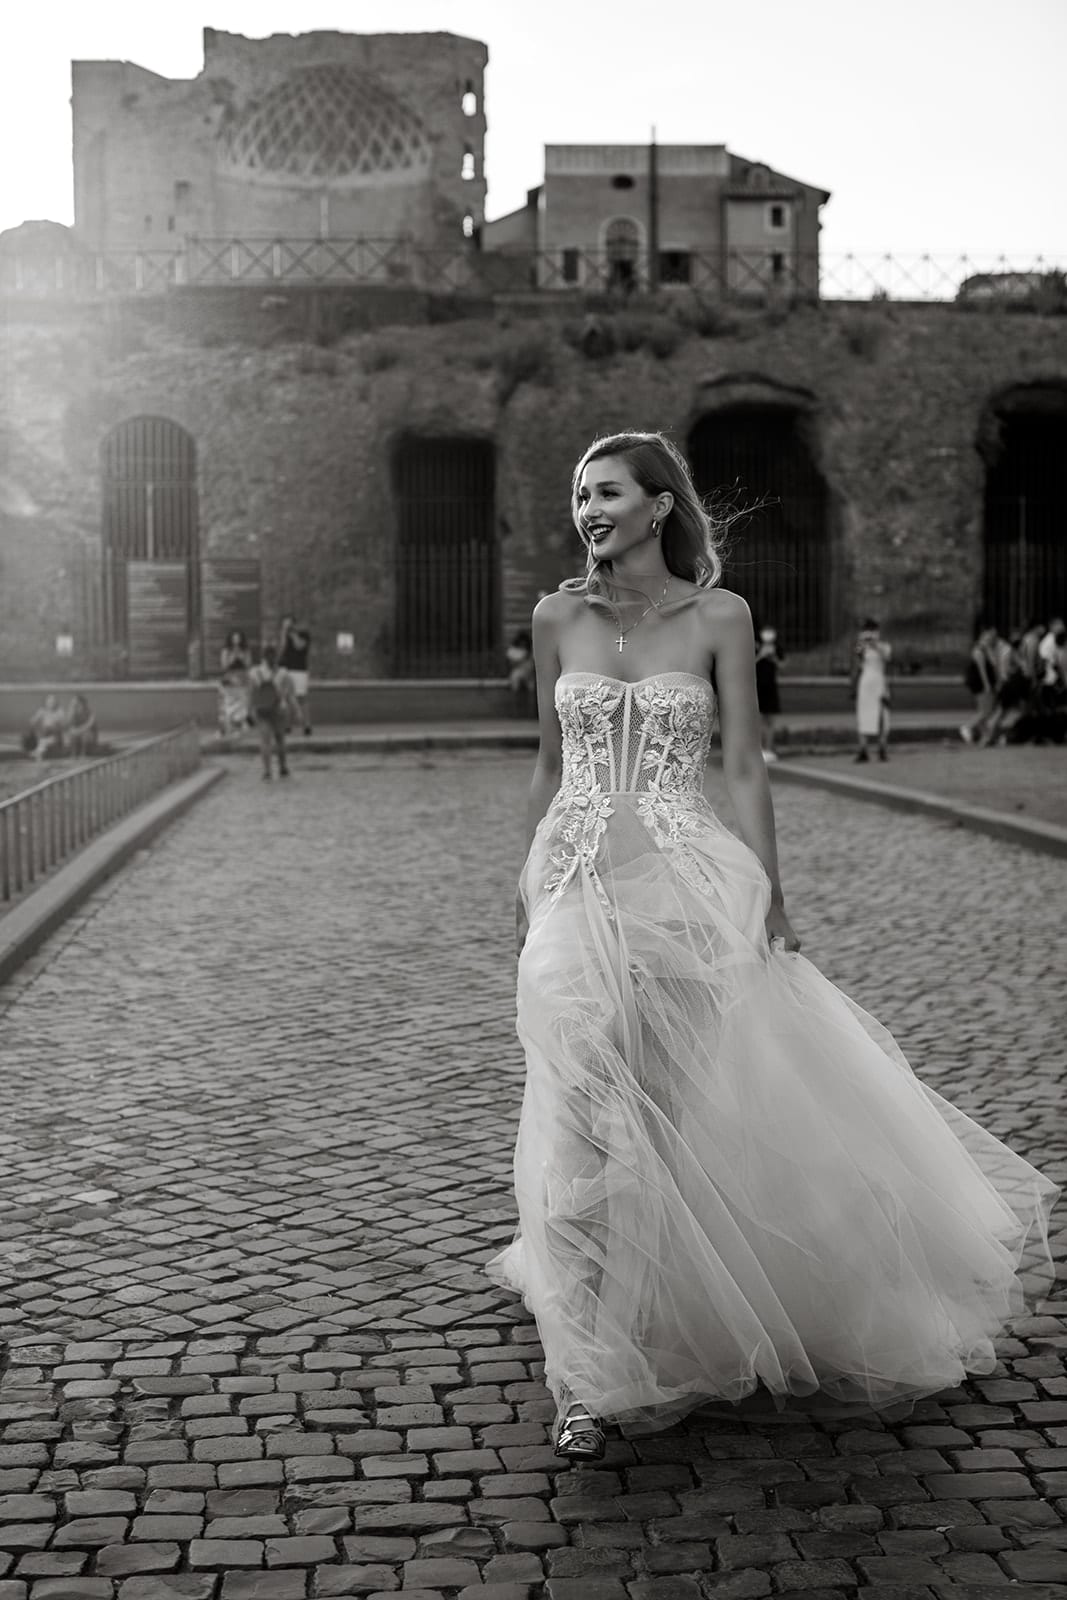 Bride walks ancient streets of Rome, Italy in Berta wedding gown